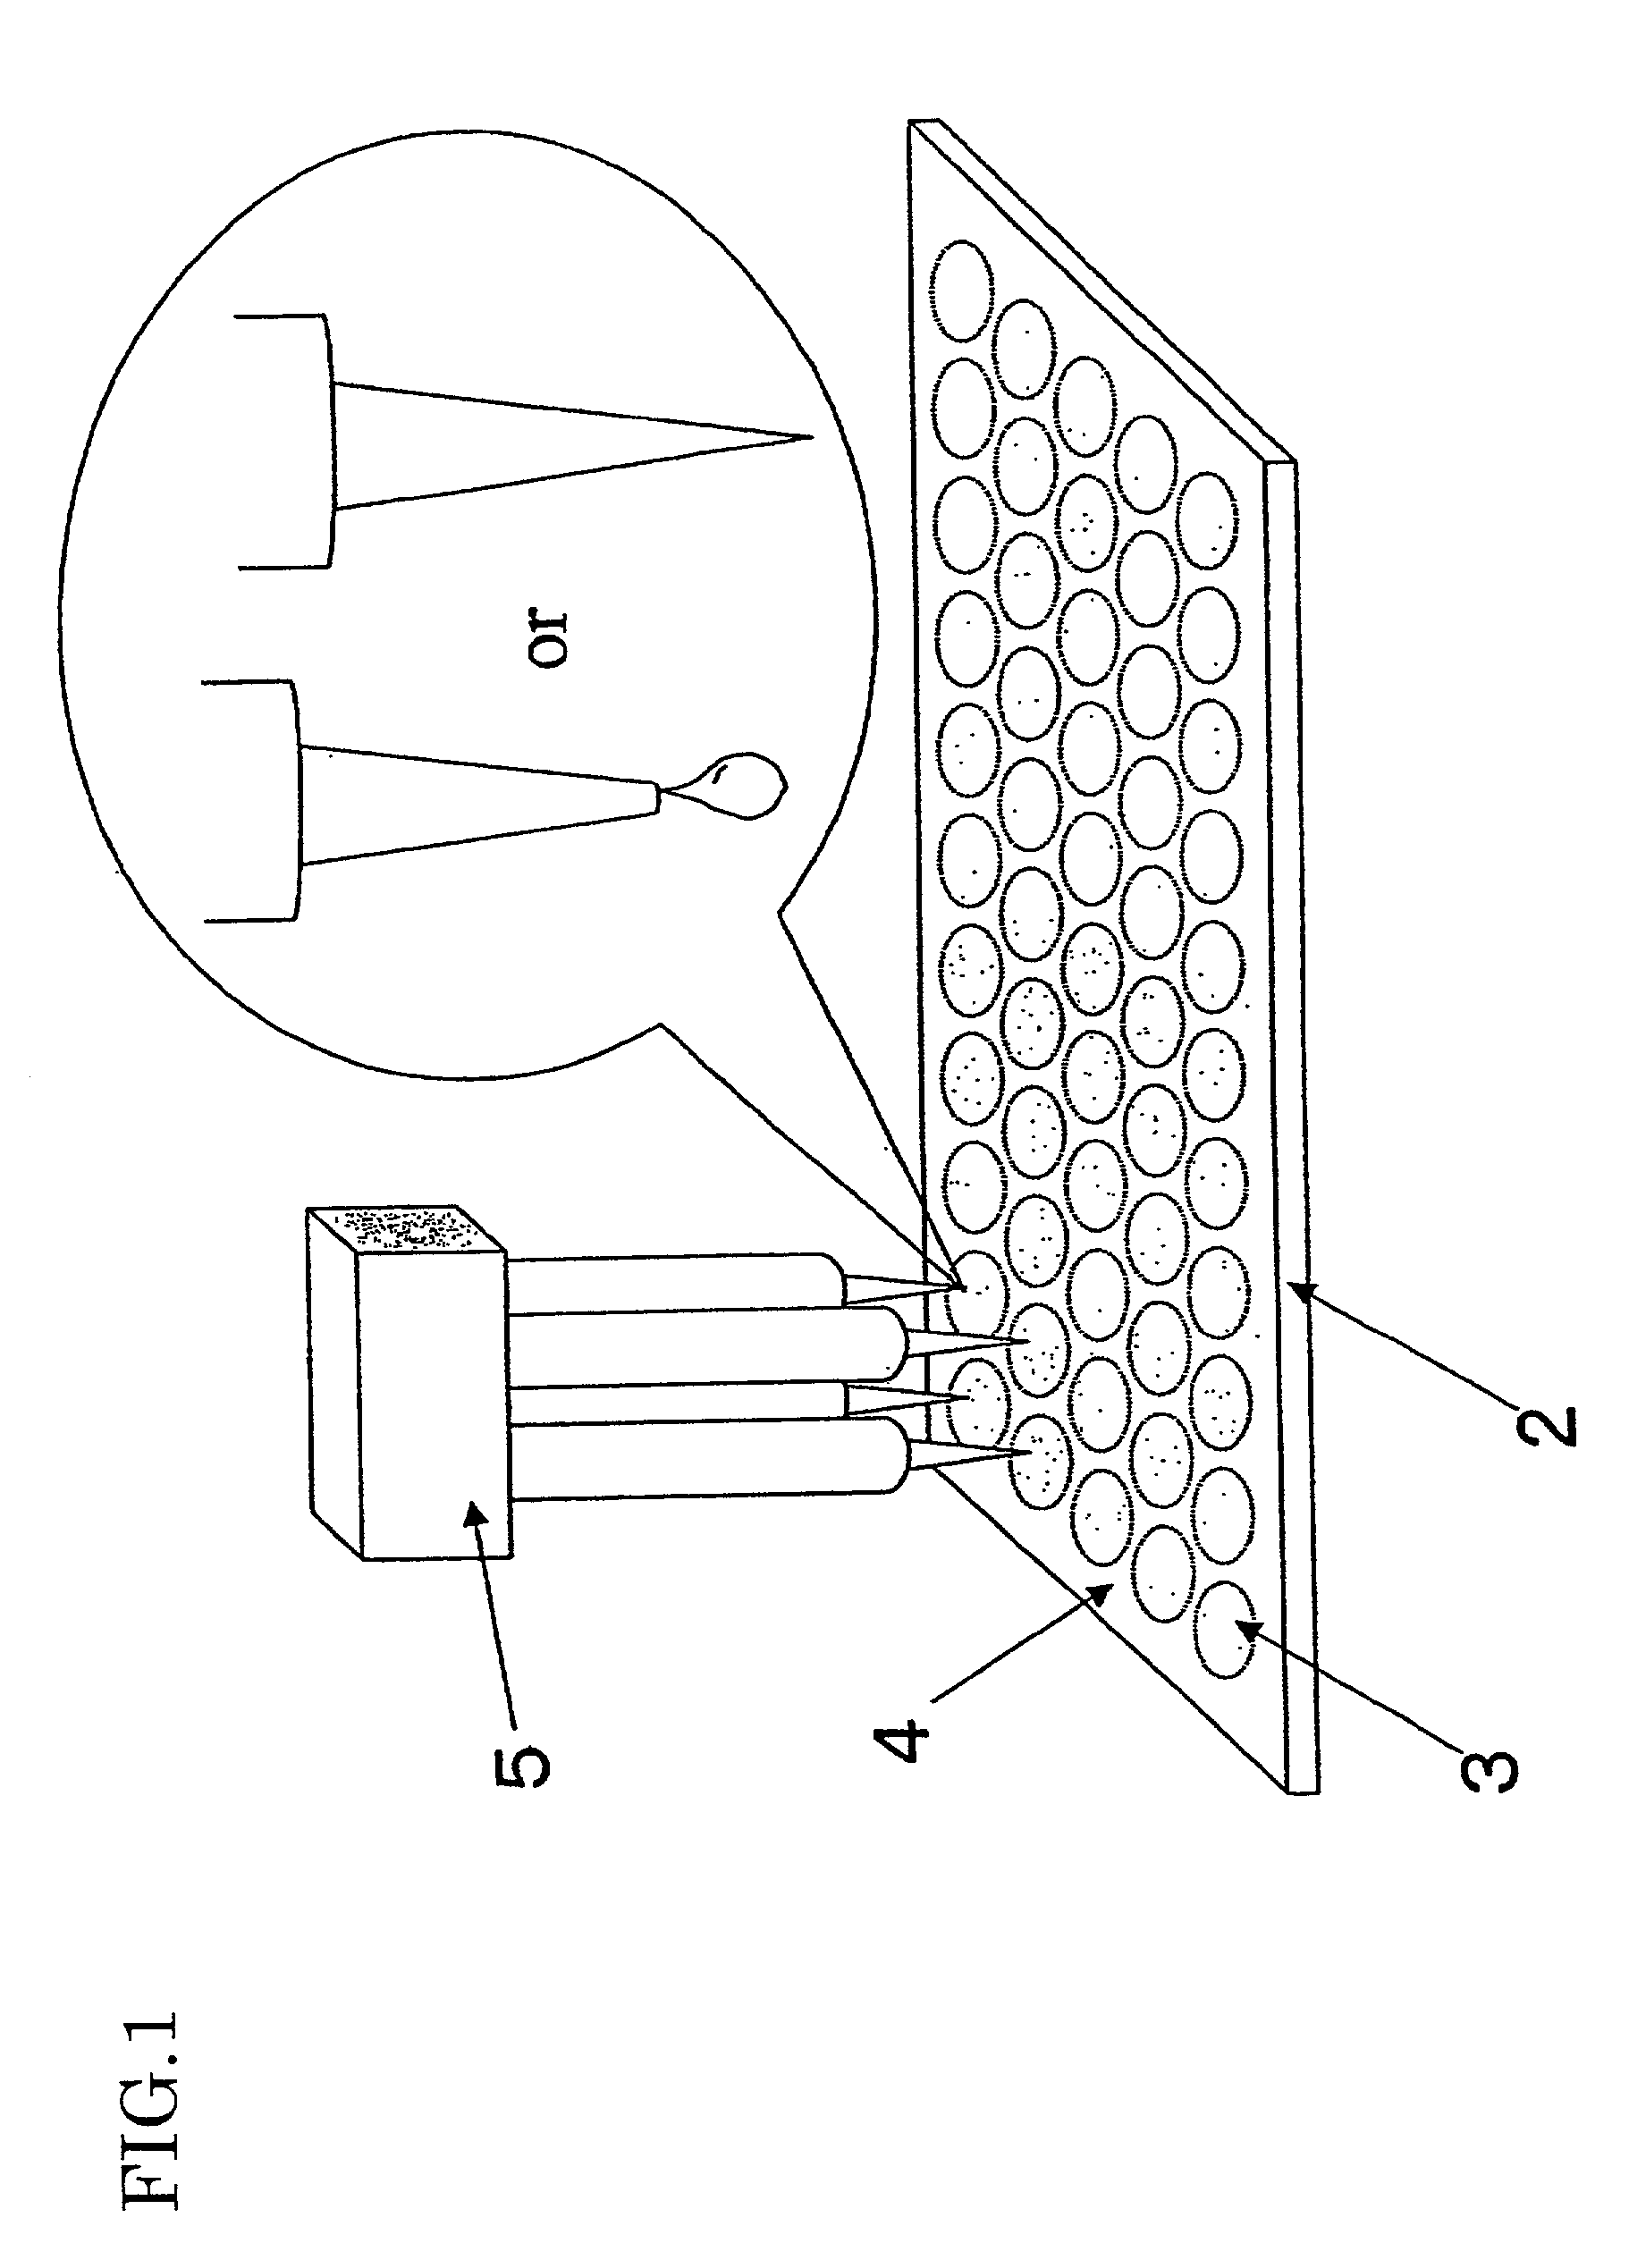 Microarray and microarray substrate